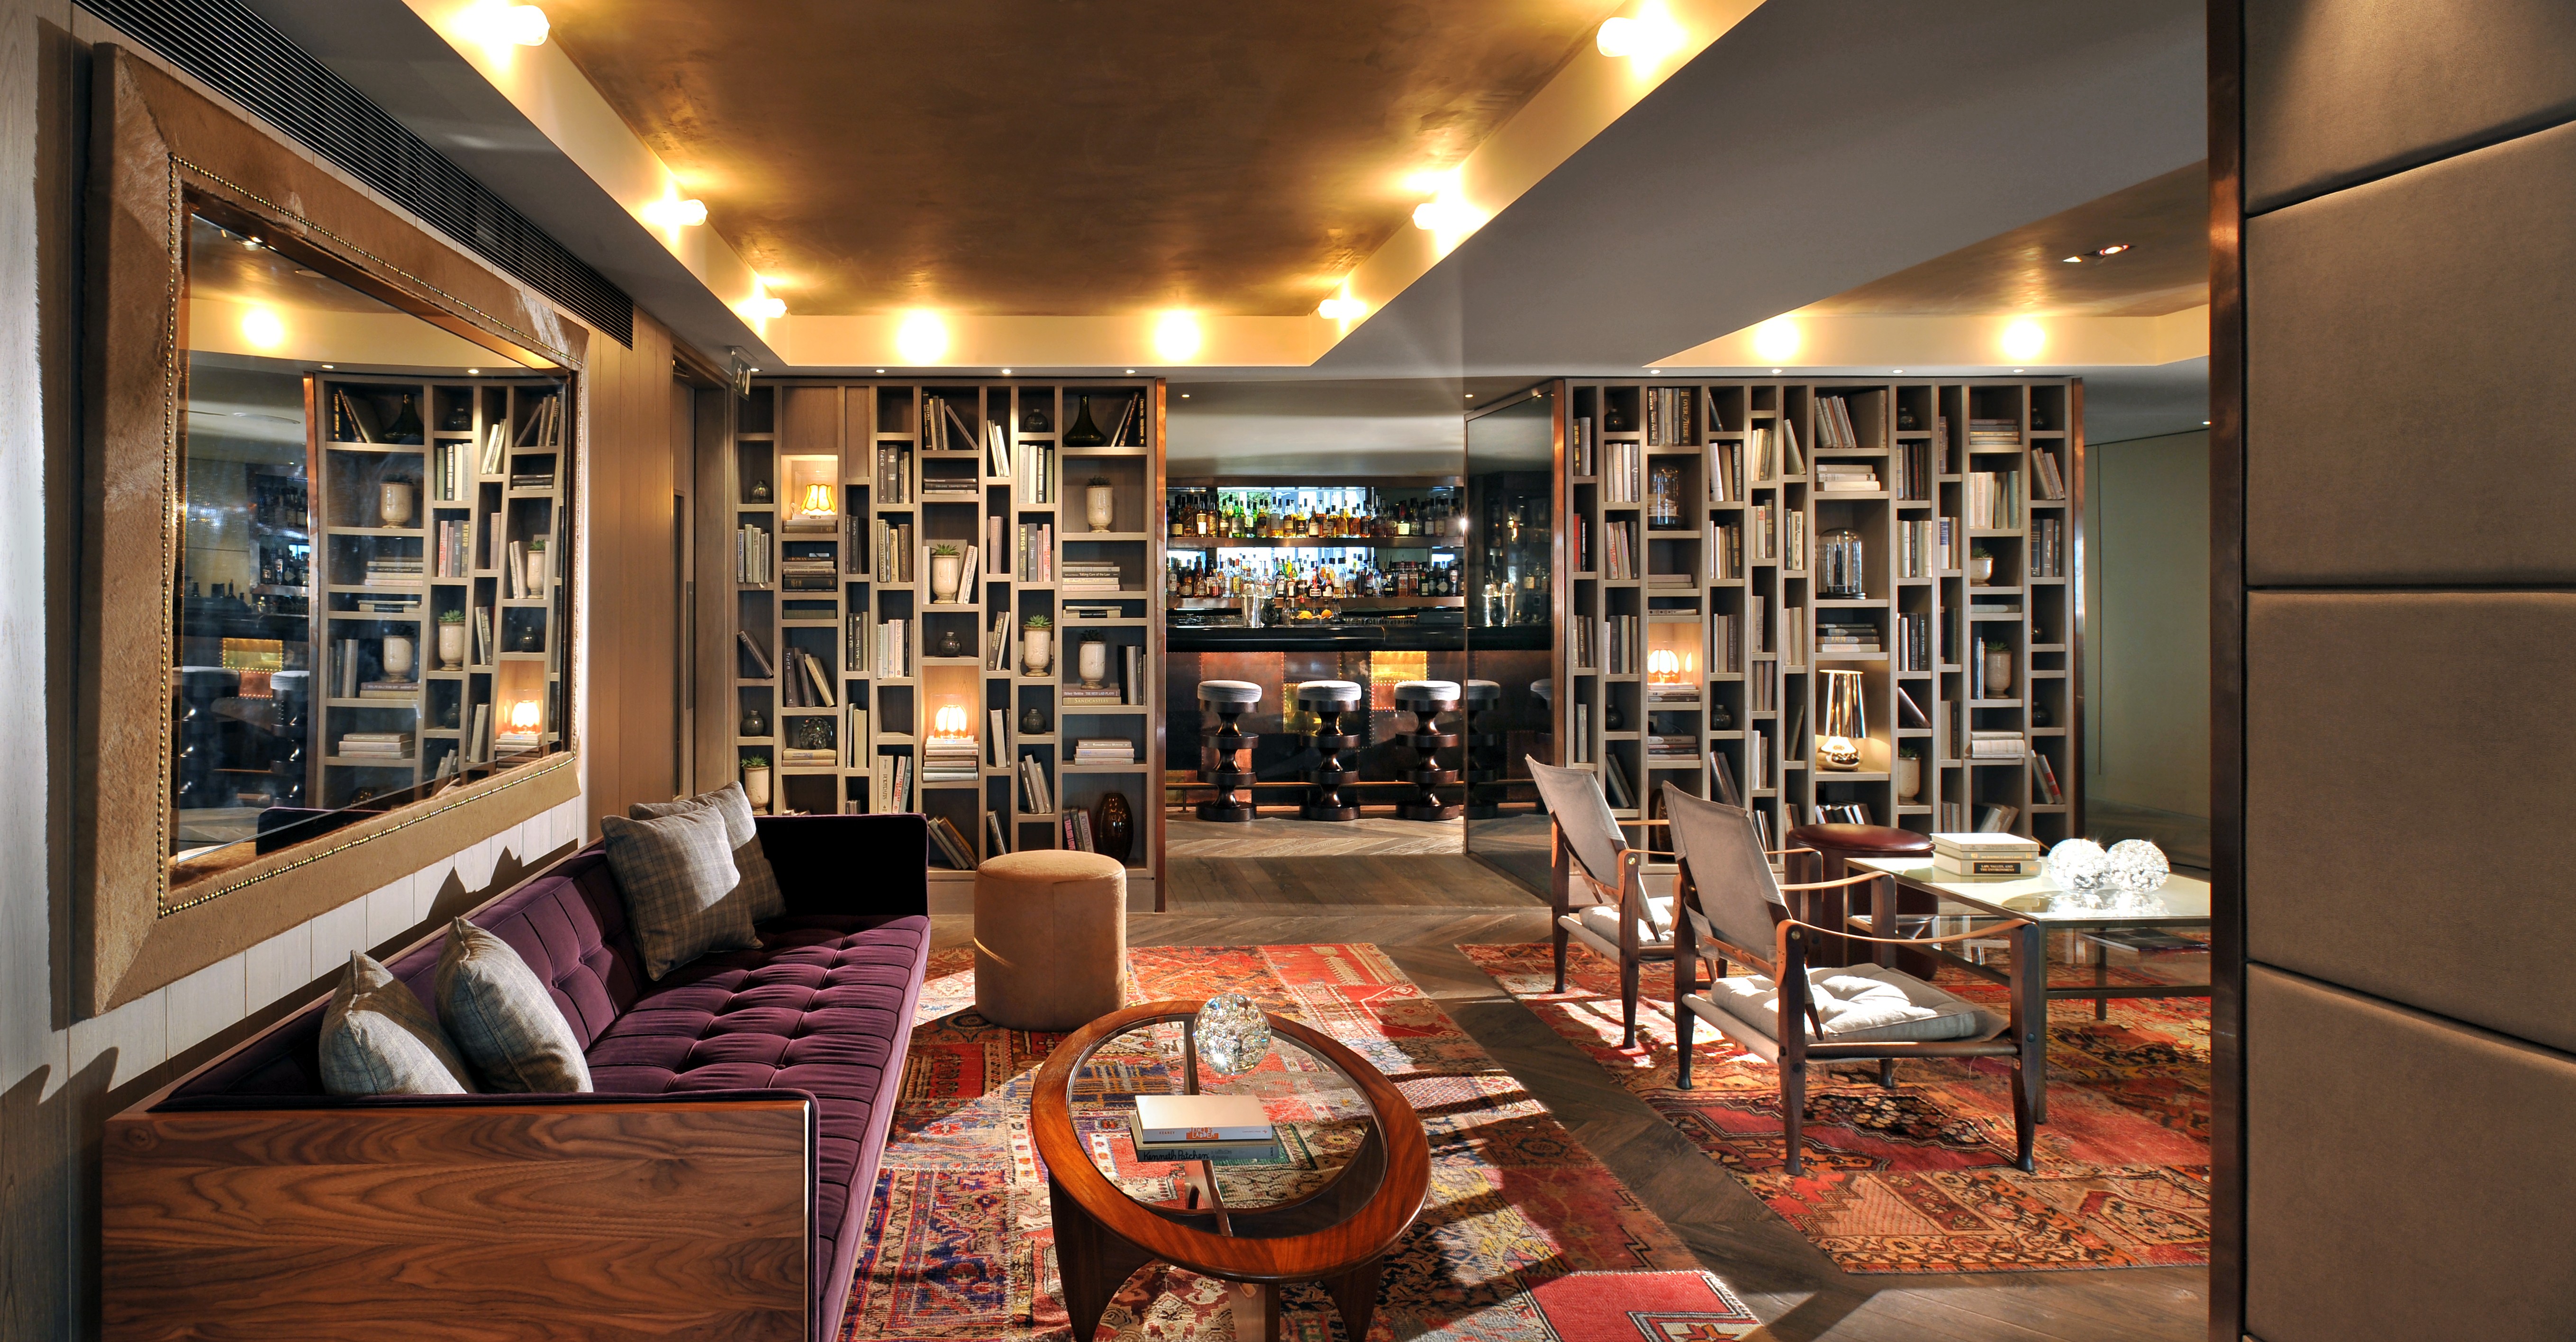 A velvet sofa, paired with a giant lacquer-framed mirror, create a stylish, spacious feel in the lounge bar at boutique hotel, The Hari, in London, created by Tara Bernerd & Partners, which plans to adopt the same approach and use clever space planning and luxurious materials to reflect the vibrant Wan Chai district where The Hari Hong Kong is set to open in 2020.